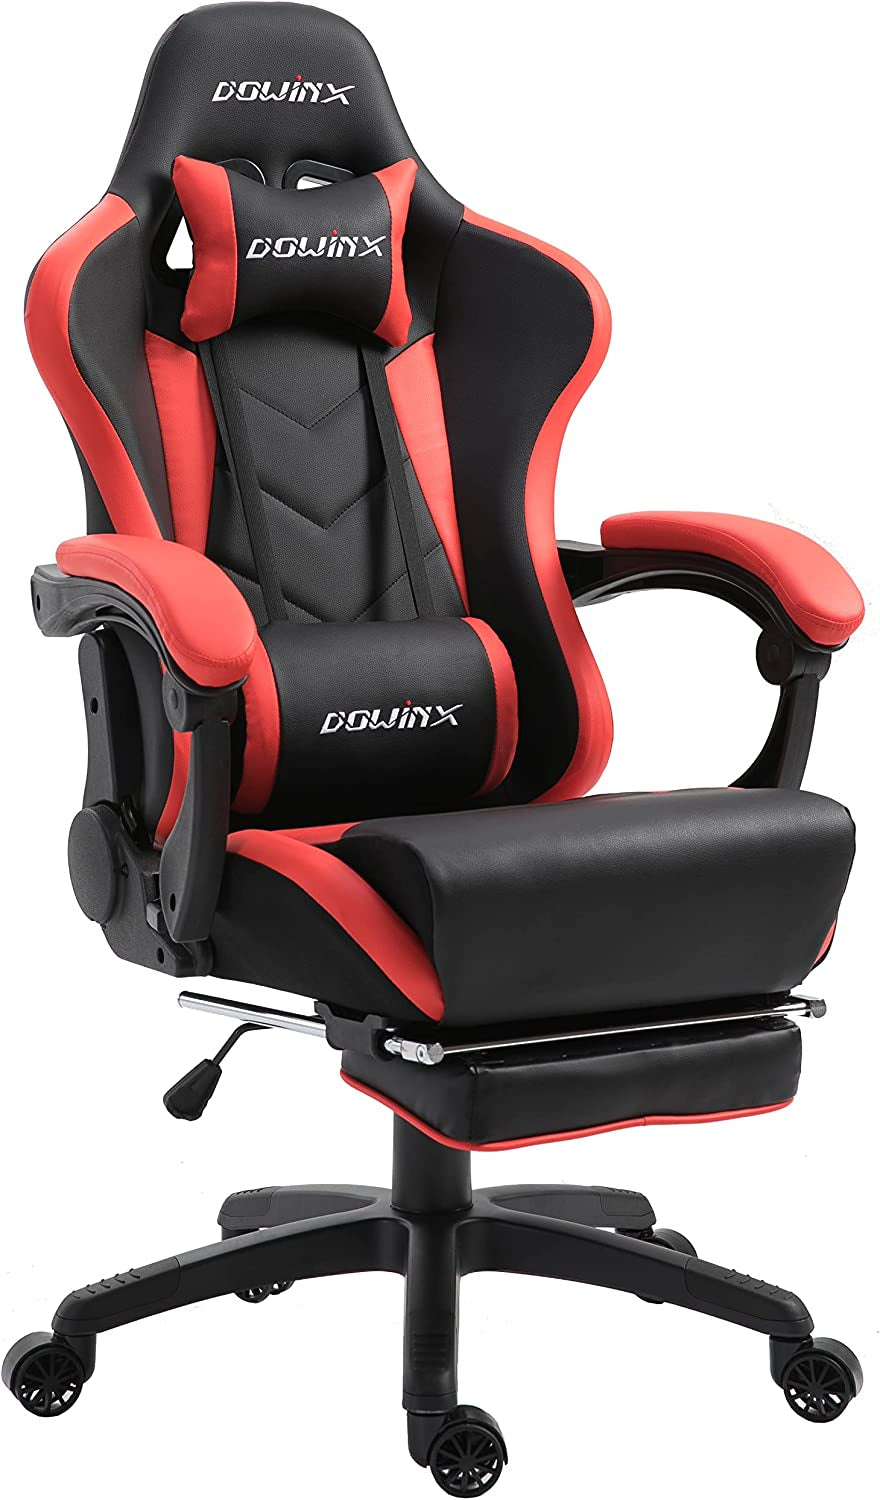 Gaming Chair Ergonomic Racing Style Recliner with Massage Lumbar Support, Office Armchair for Computer PU Leather E-Sports Gamer Chairs with Retractable Footrest (Black&Red)